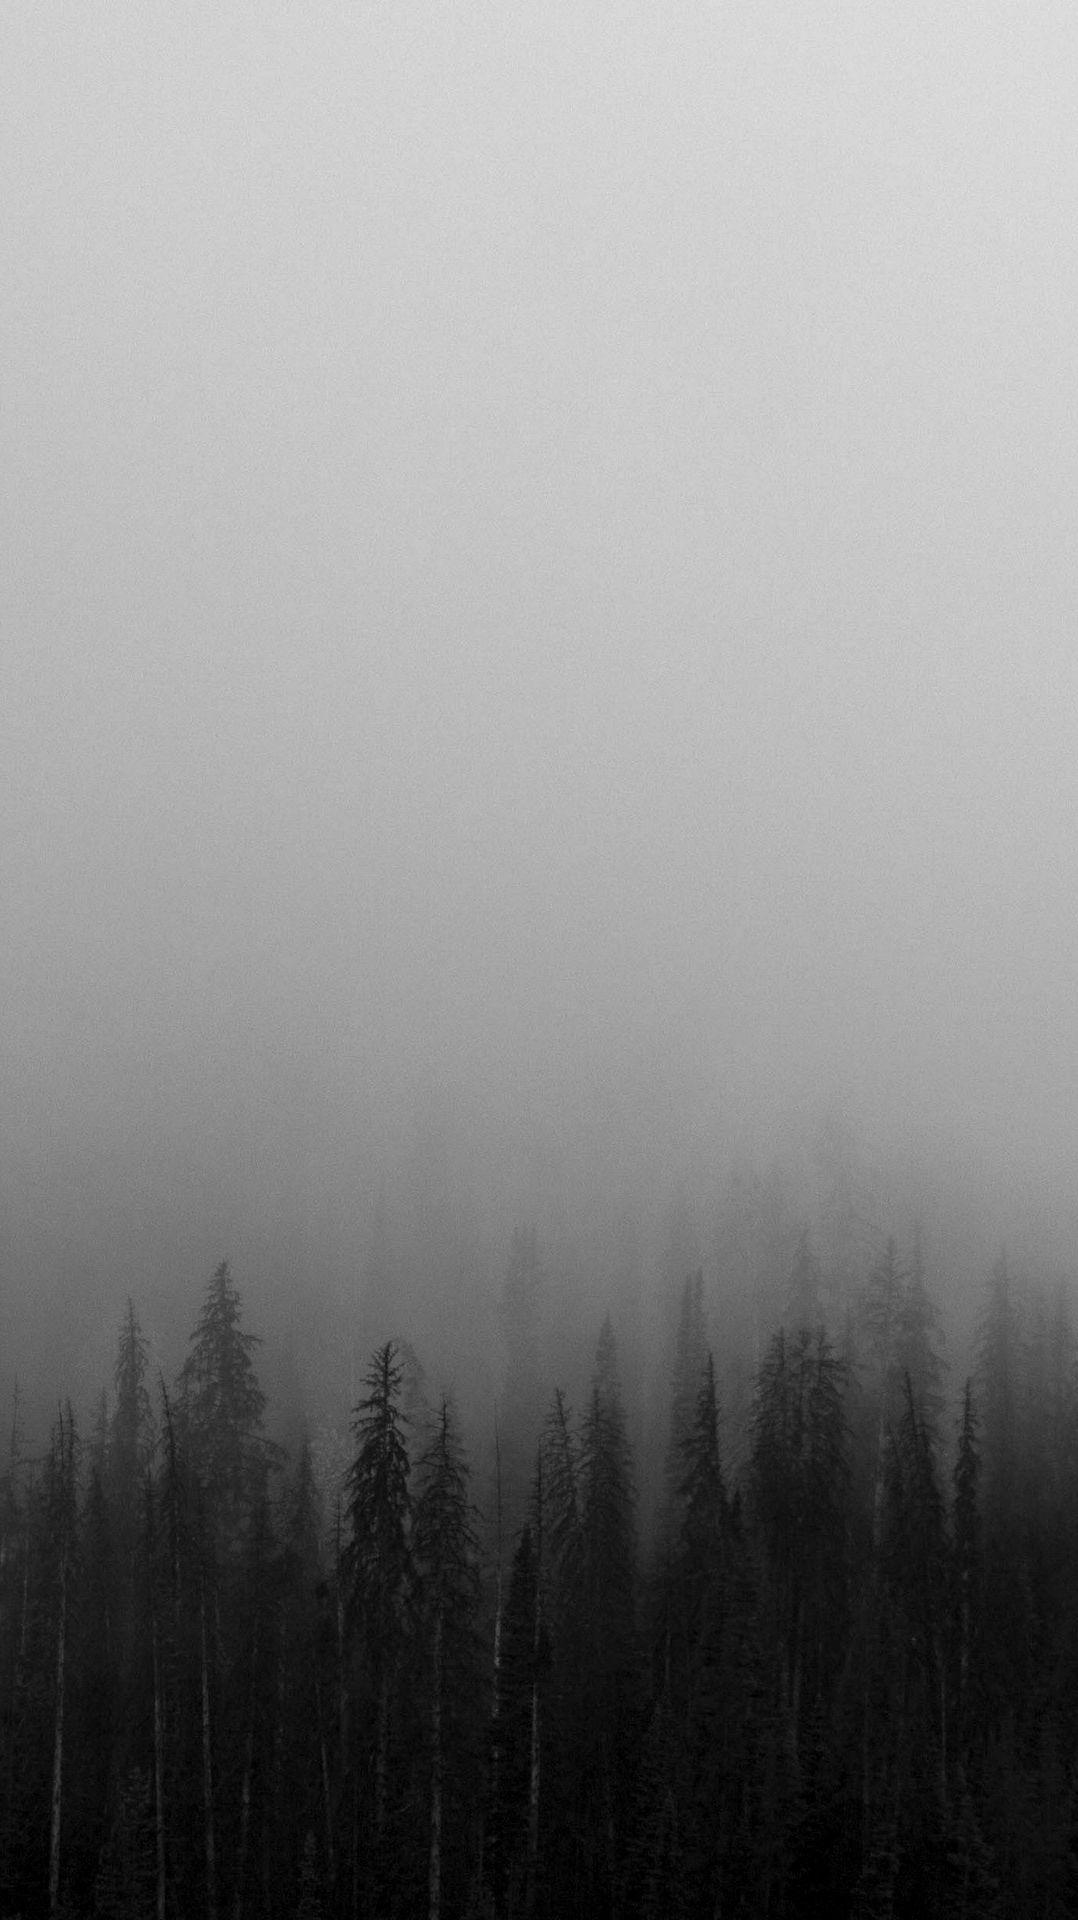 Black And White Mist Forests Wallpaper. IPhone Wallpaper In 2019